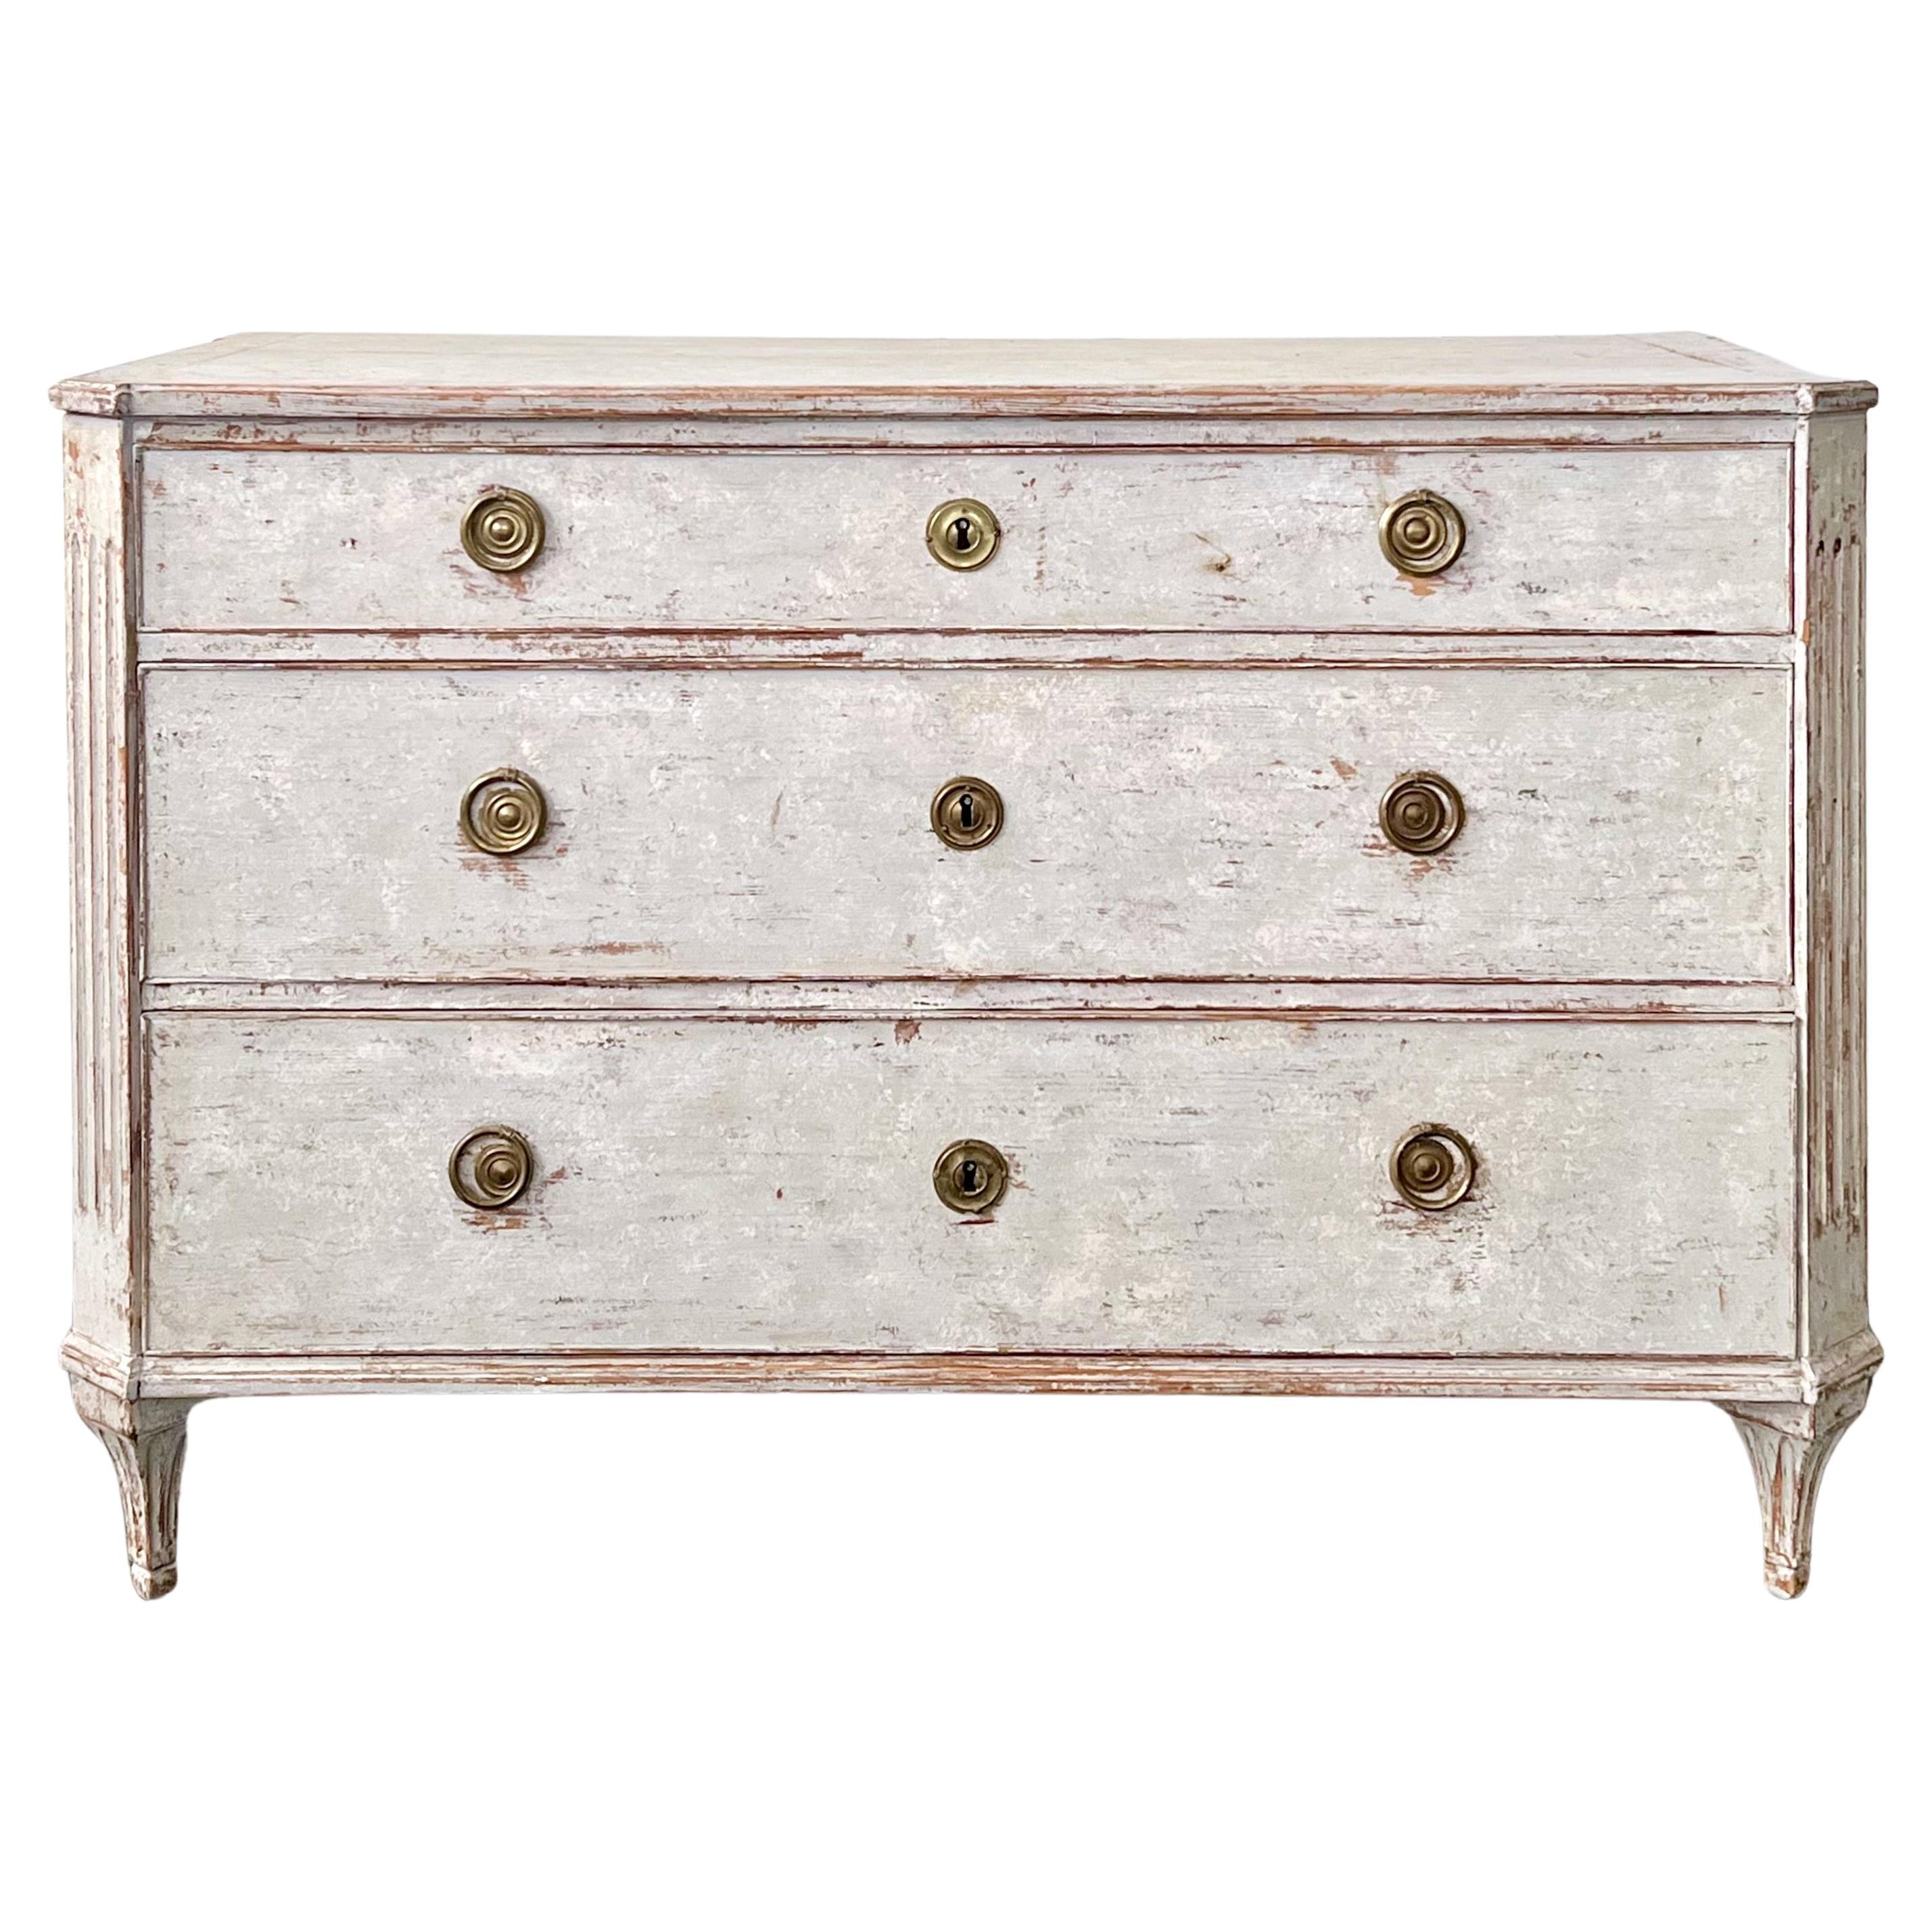  Swedish Period Gustavian Chest of Drawers 1780-1800 For Sale